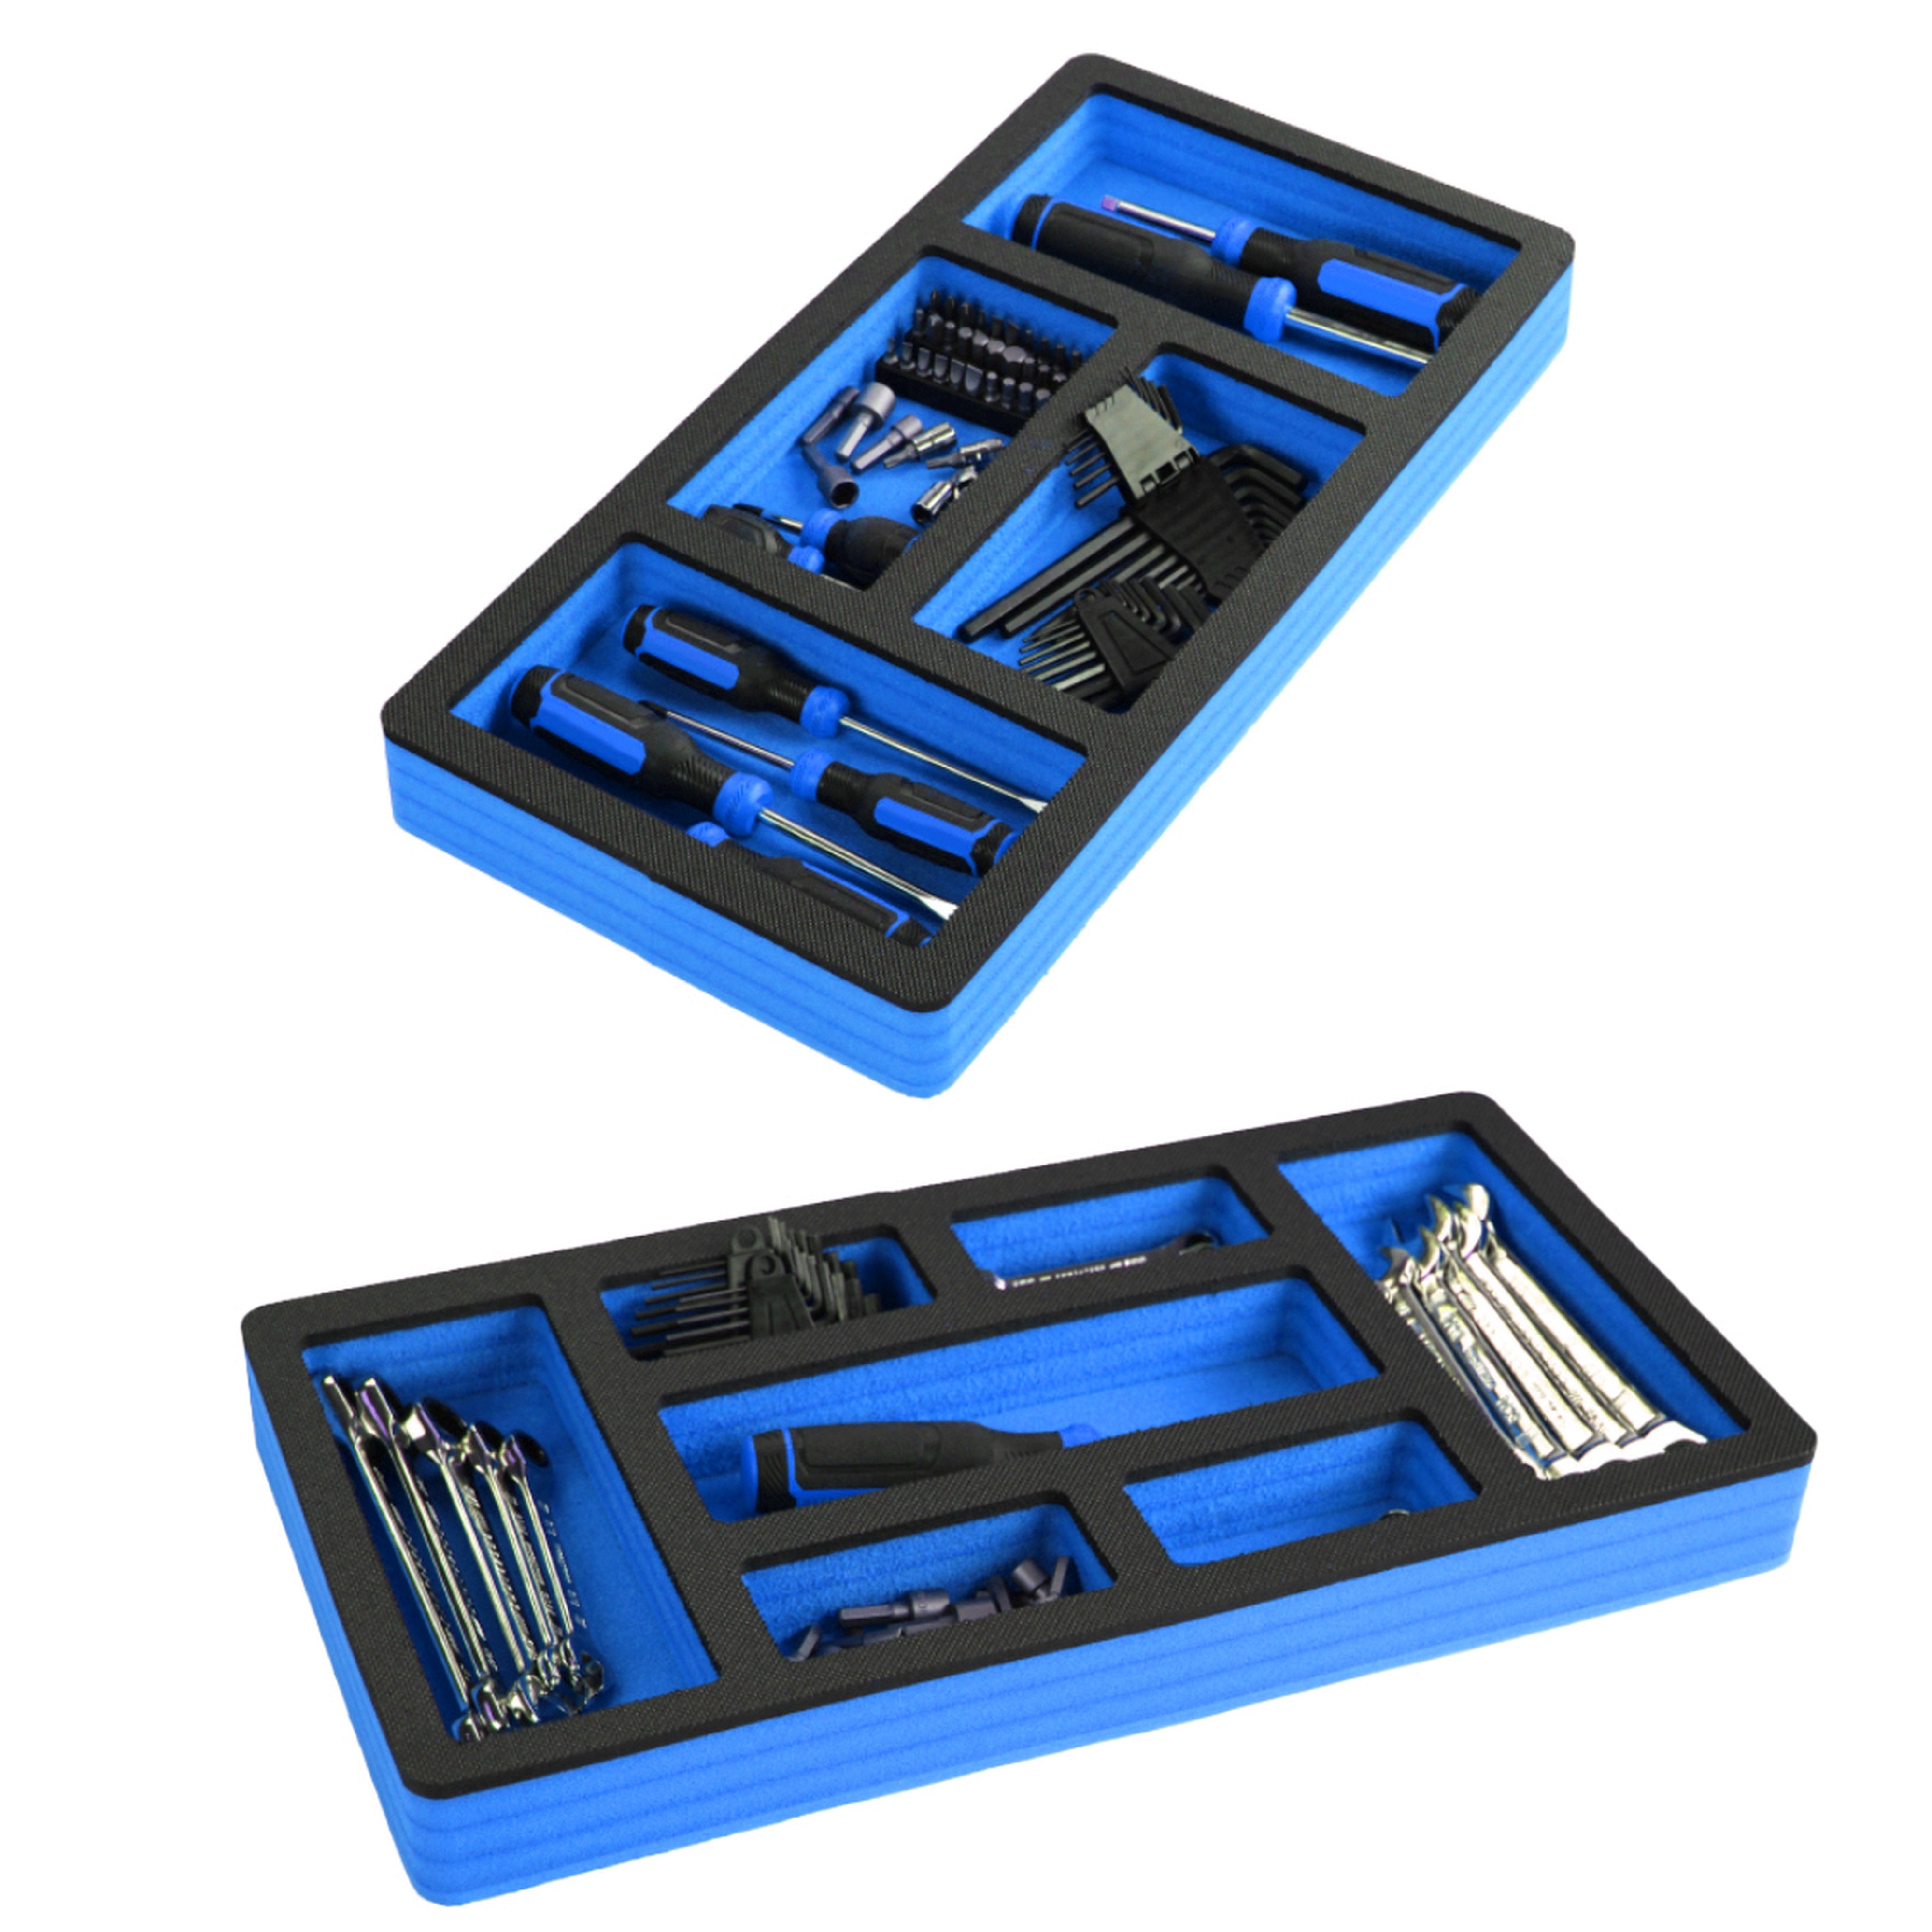 Tool Drawer Organizer 2-Piece Insert Set Blue and Black Durable Foam Non-Slip Anti-Rattle Bin Holder Tray 20 x 10 Inches Large Pockets Fits Craftsman Husky Kobalt Milwaukee and Many Others